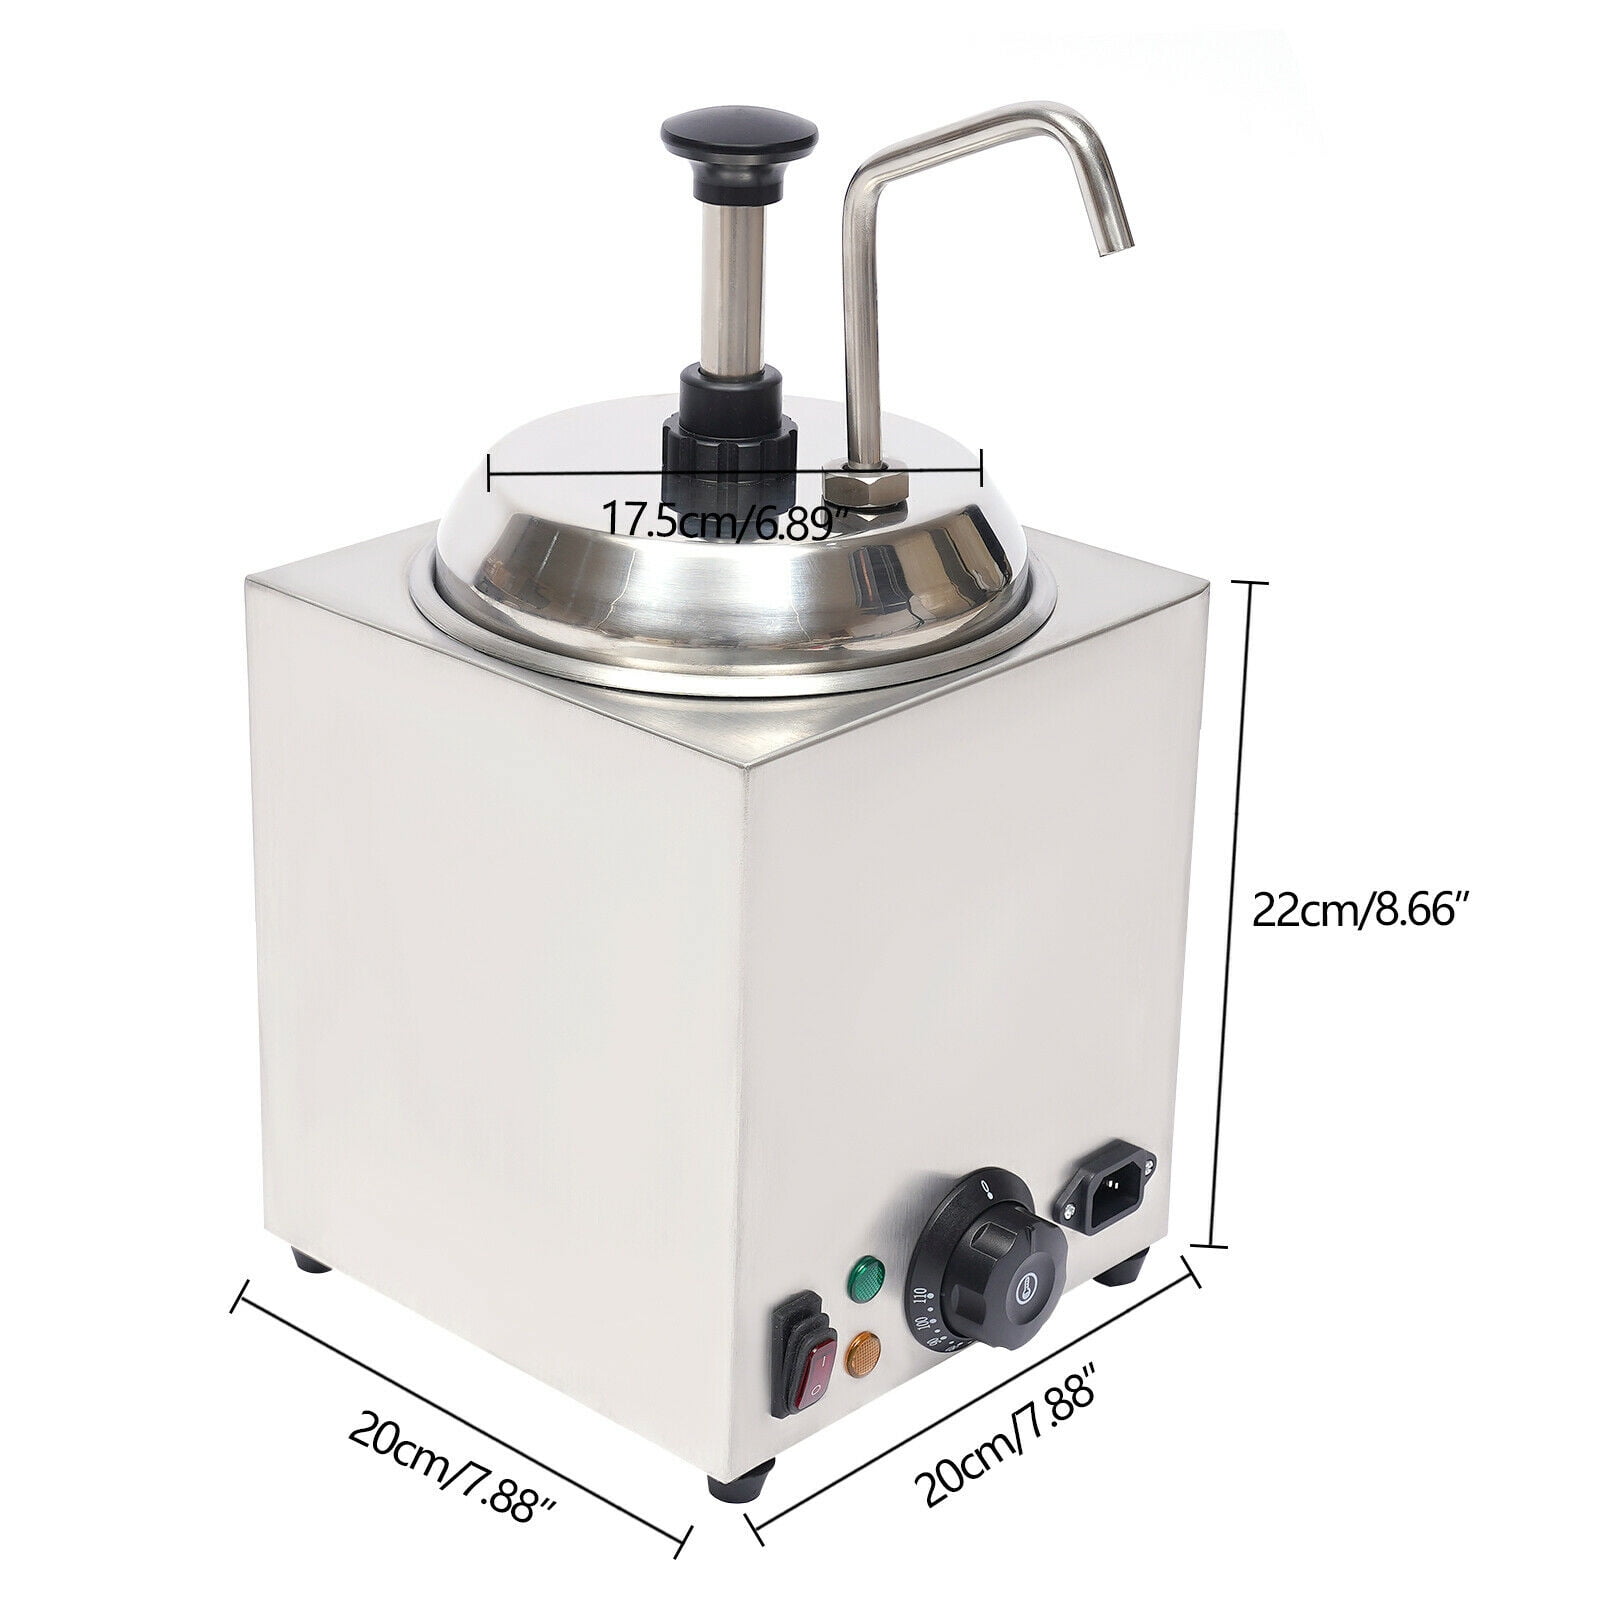 VEVOR Electric Cheese Dispenser with Pump 2.3 x 2 qt. Commercial Hot Fudge  Warmer Stainless Steel Heated Pump Dispenser DRNZBBXG2X25M0AWDV1 - The Home  Depot